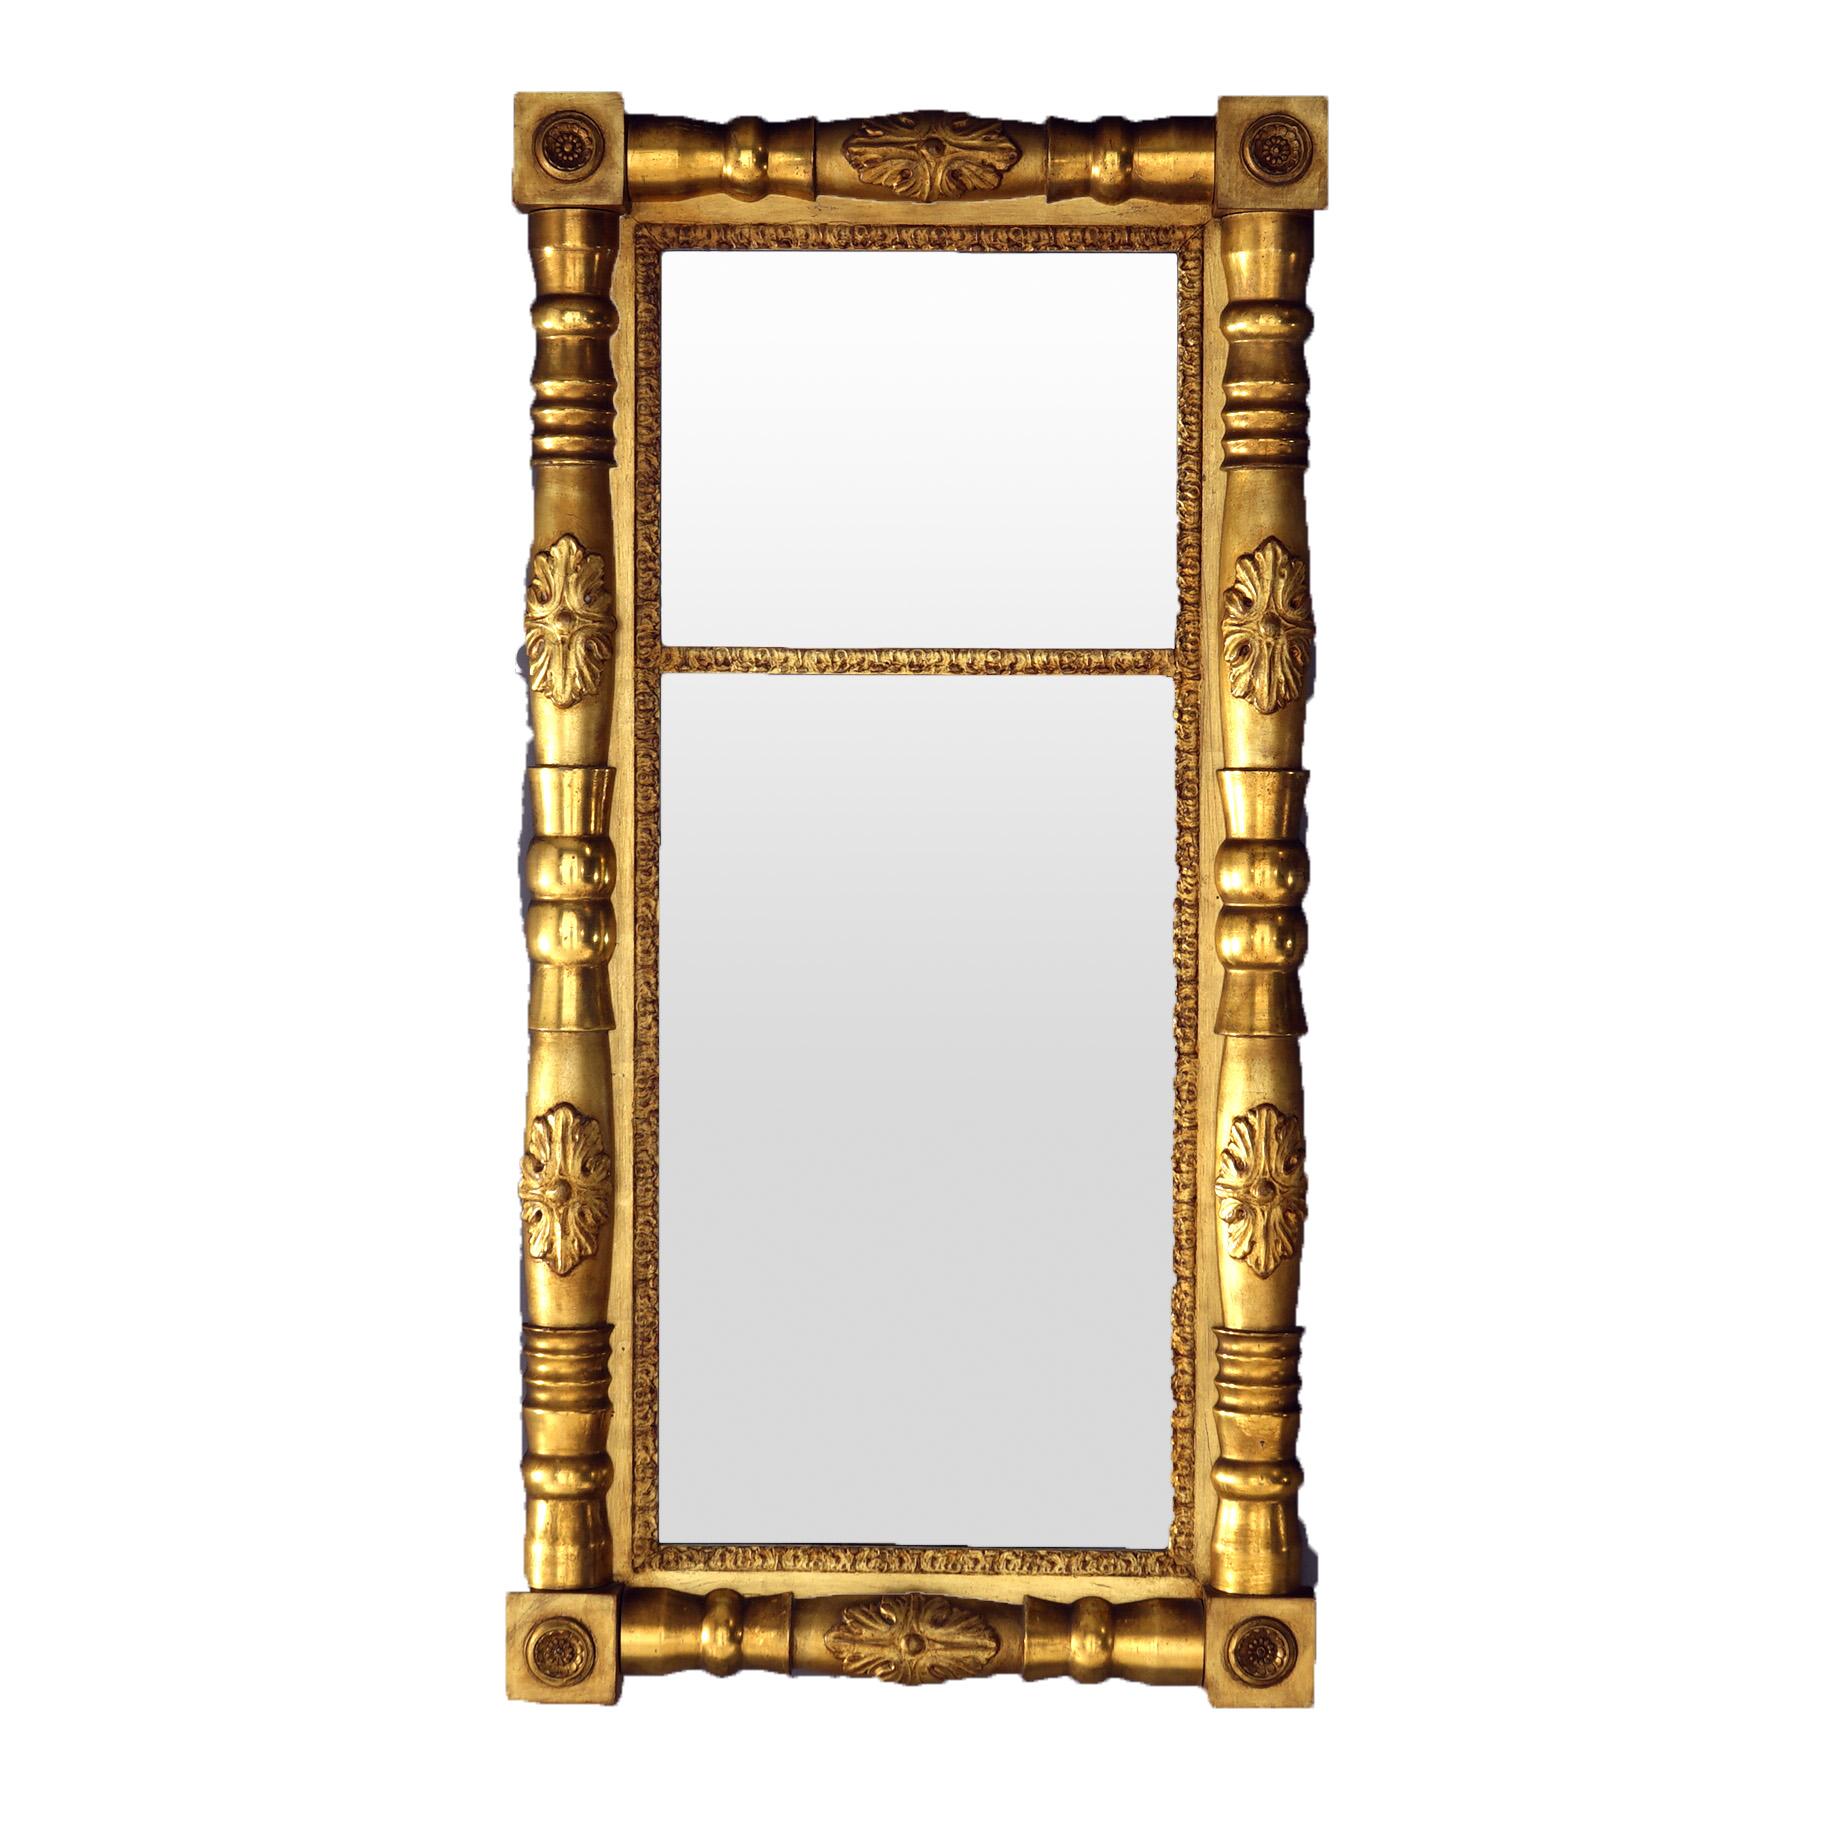 Antique Classical American Empire First Finish Giltwood Wall Mirror with Column and Floral Elements, C1840

Measures- 39.25''H x 20''W x 3.5''D; 13.75'' x 34.25'' sight